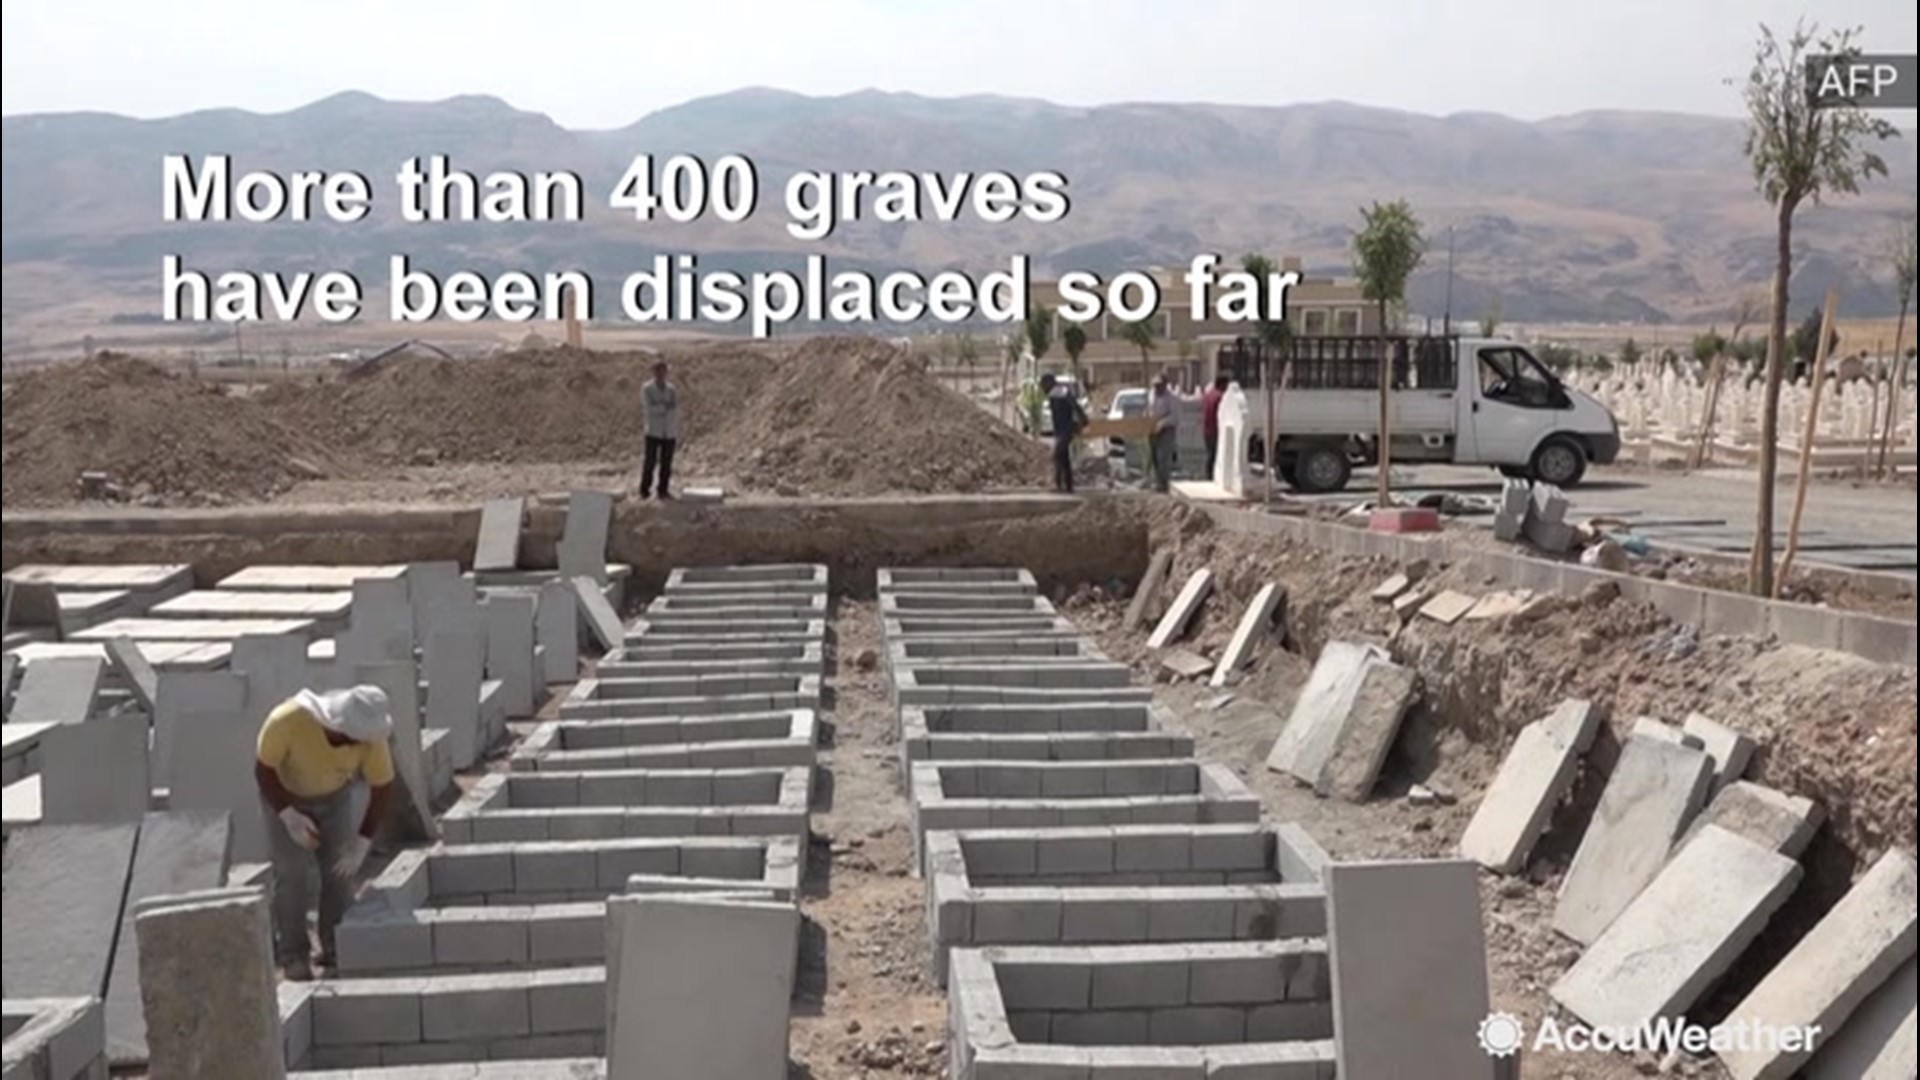 Hundreds of graves in the 12,000-year-old Turkish town of Hasankeyf are being moved as the area prepares to be flooded in a new dam project. Family members of the deceased have been on scene, monitoring the progress of the move. They say they don't want the graves to be disturbed, but it's necessary due to the project.